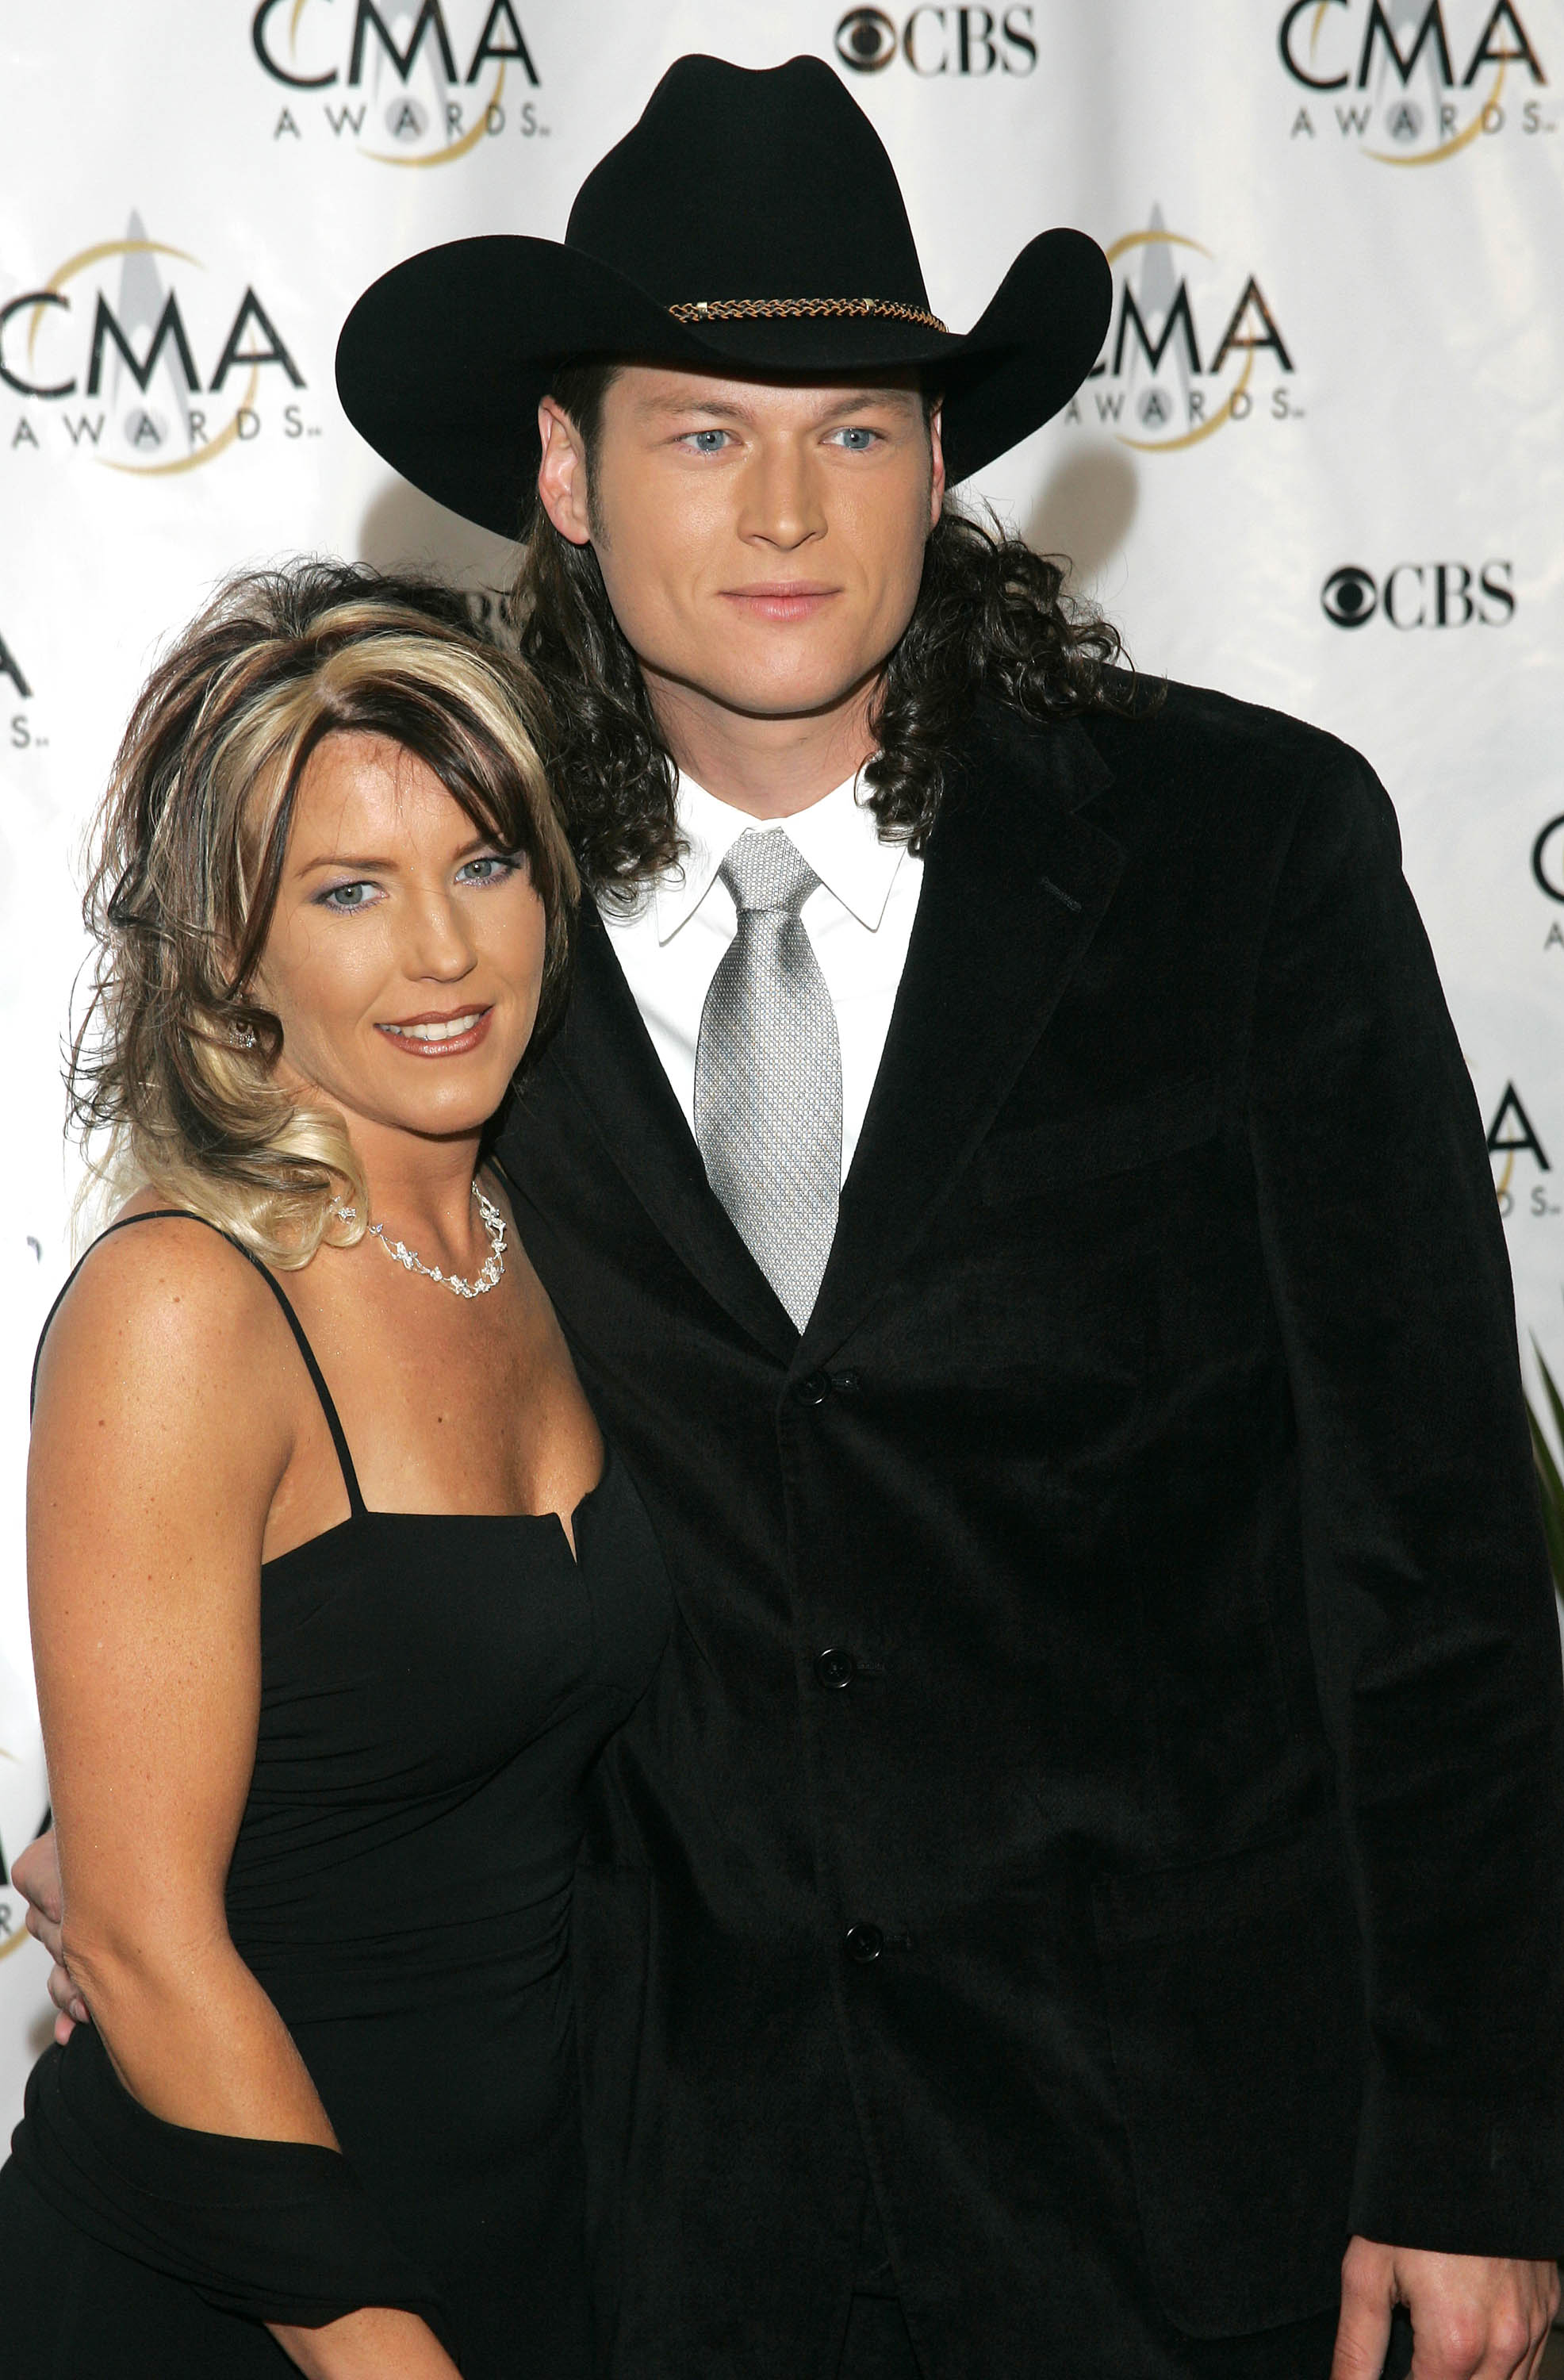 Blake Shelton and first wife Kaynette Shelton at the 38th Annual CMA Awards on November 9, 2004, in Nashville, Tennessee